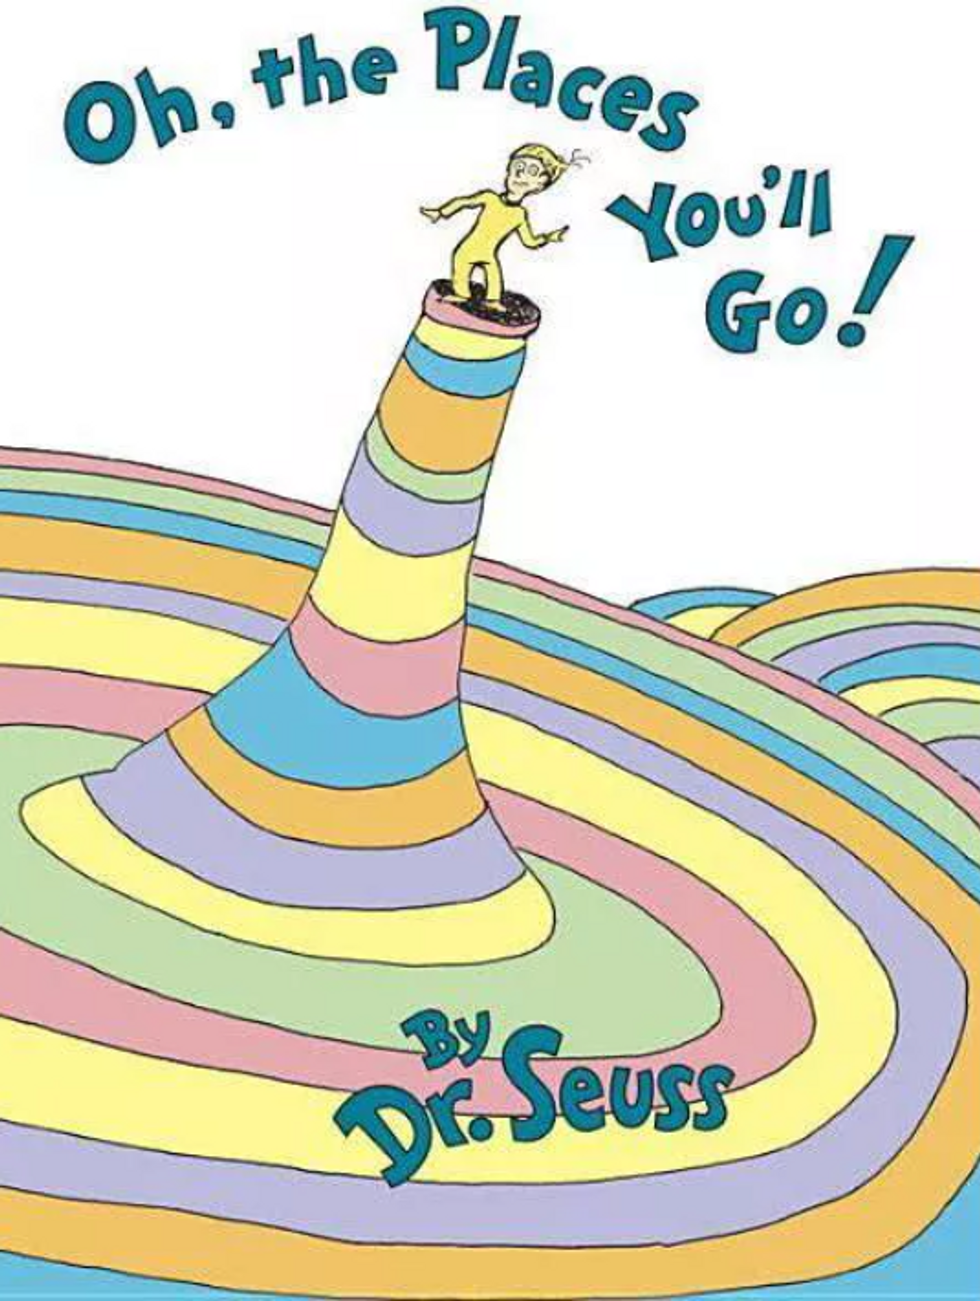 https://www.target.com/p/oh-the-places-you-ll-go-by-dr-seuss/-/A-51276096?ref=tgt_adv_XS000000&AFID=google_pla_df&fndsrc=tgtao&CPNG=PLA_Entertainment%2BShopping_Brand&adgroup=SC_Entertainment&LID=700000001170770pgs&network=g&device=c&location=9015315&ds_rl=1246978&ds_rl=1248099&gclid=CjwKCAjwwYP2BRBGEiwAkoBpAhXL24Z18FzA3a05YOjm6hvlyf-v3RDlnMH2CLVRRL836Ck4fNzrshoCrckQAvD_BwE&gclsrc=aw.ds